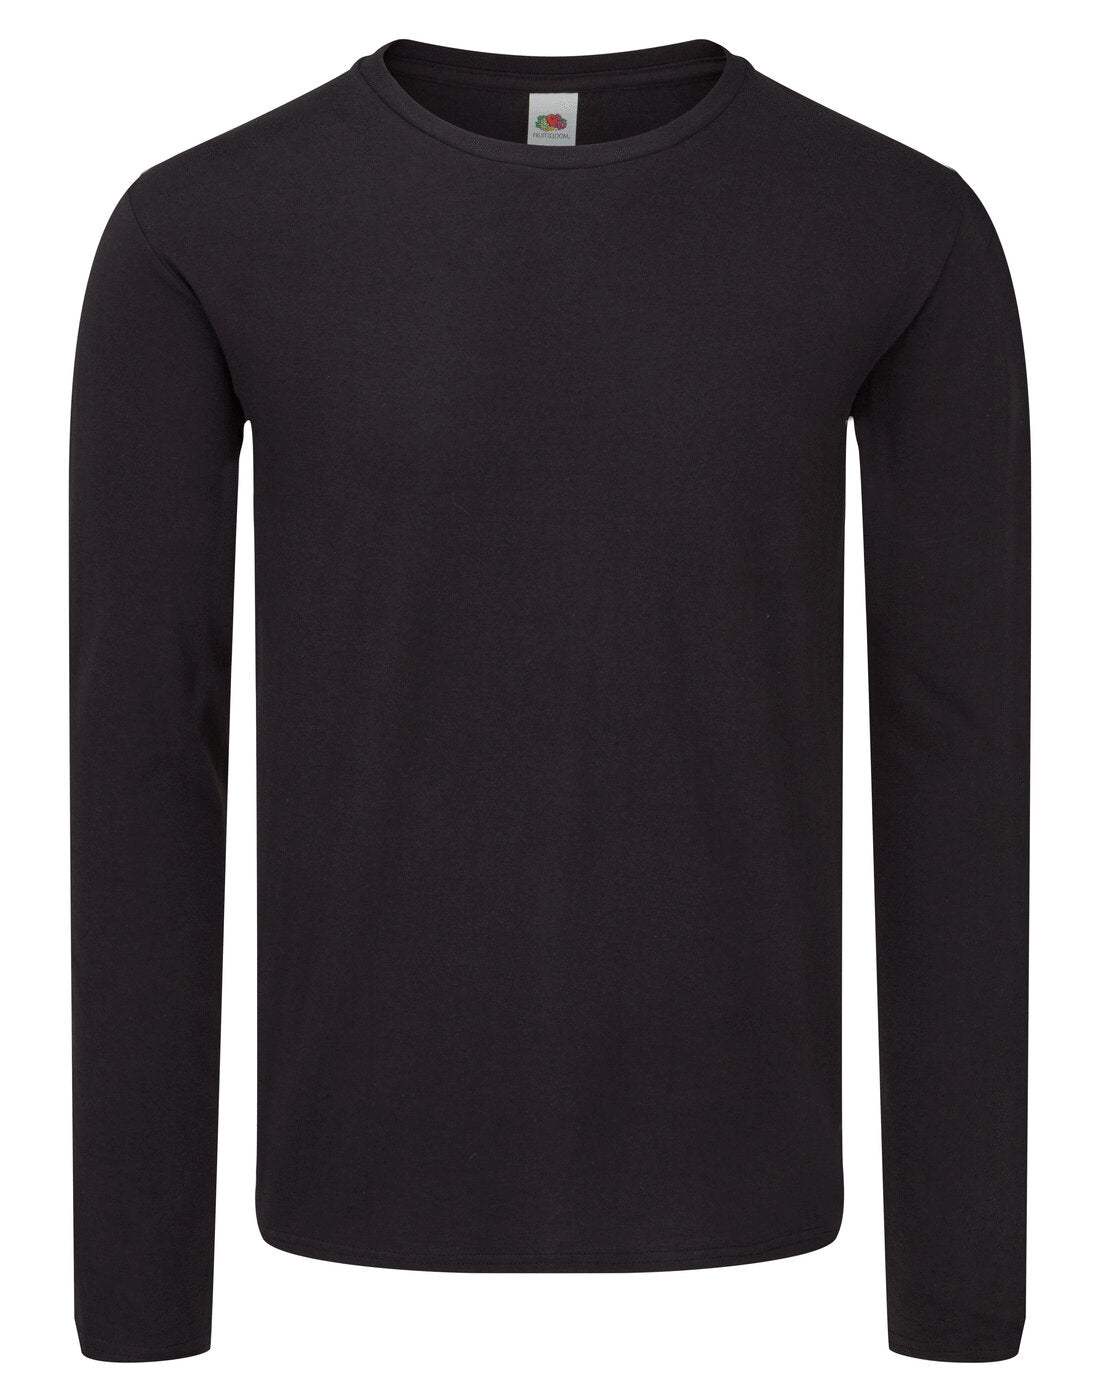 Fruit of the Loom Iconic 150 Classic Long Sleeve T - Black